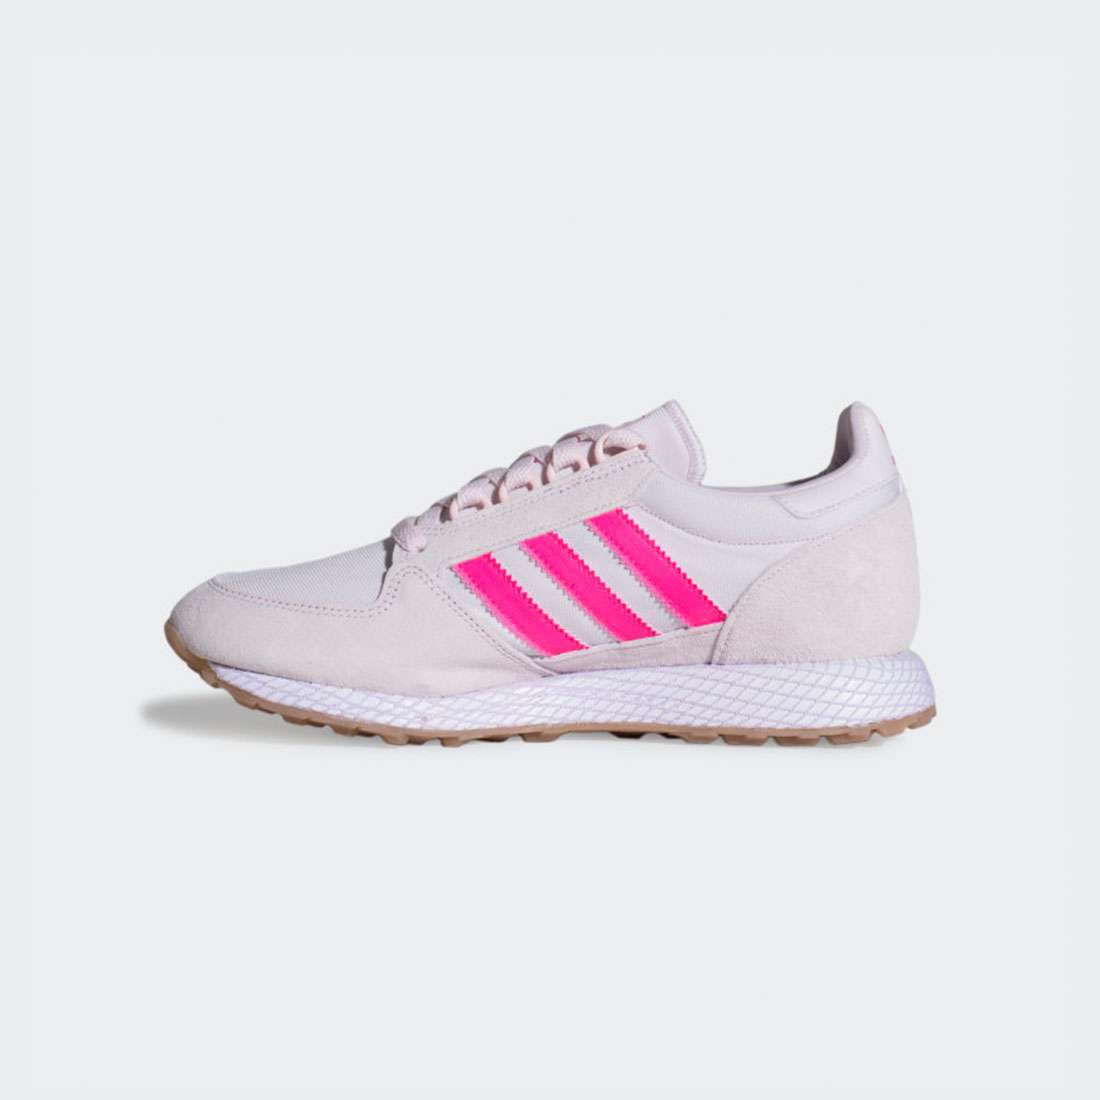 ADIDAS FOREST GROVE W WHITE/PINK